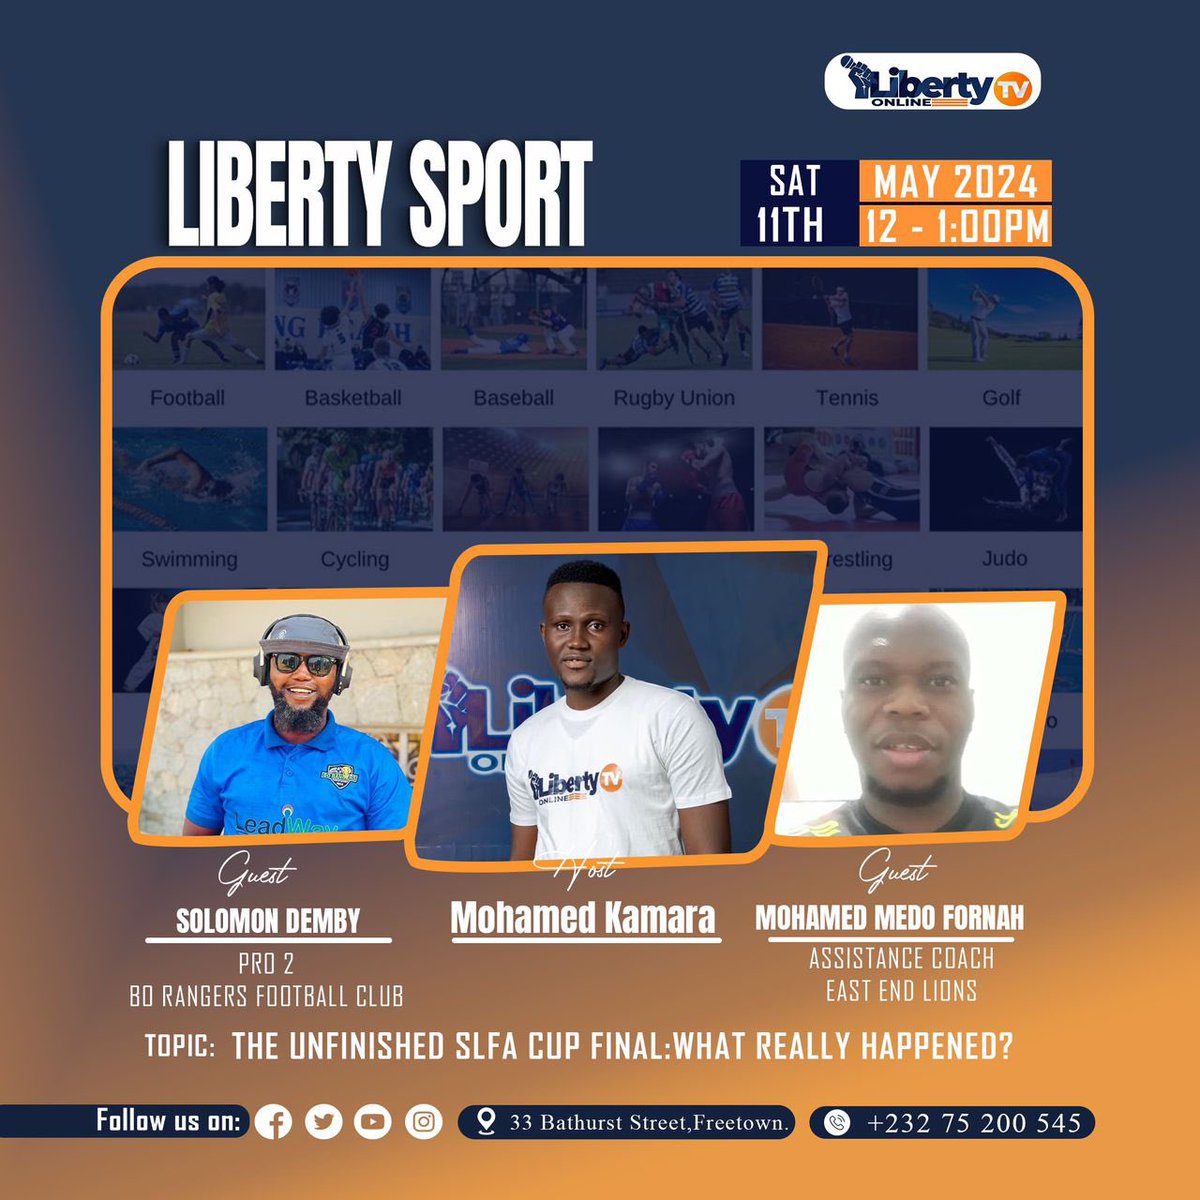 The FA Cup match between Bo Rangers FC and East End Lions FC, which took place on Saturday, May 4, 2024, at New Portloko Field, ended in chaos in the second half. 

#libertyonlinetv
#FREE
#fearless
#inclusive
#journalism